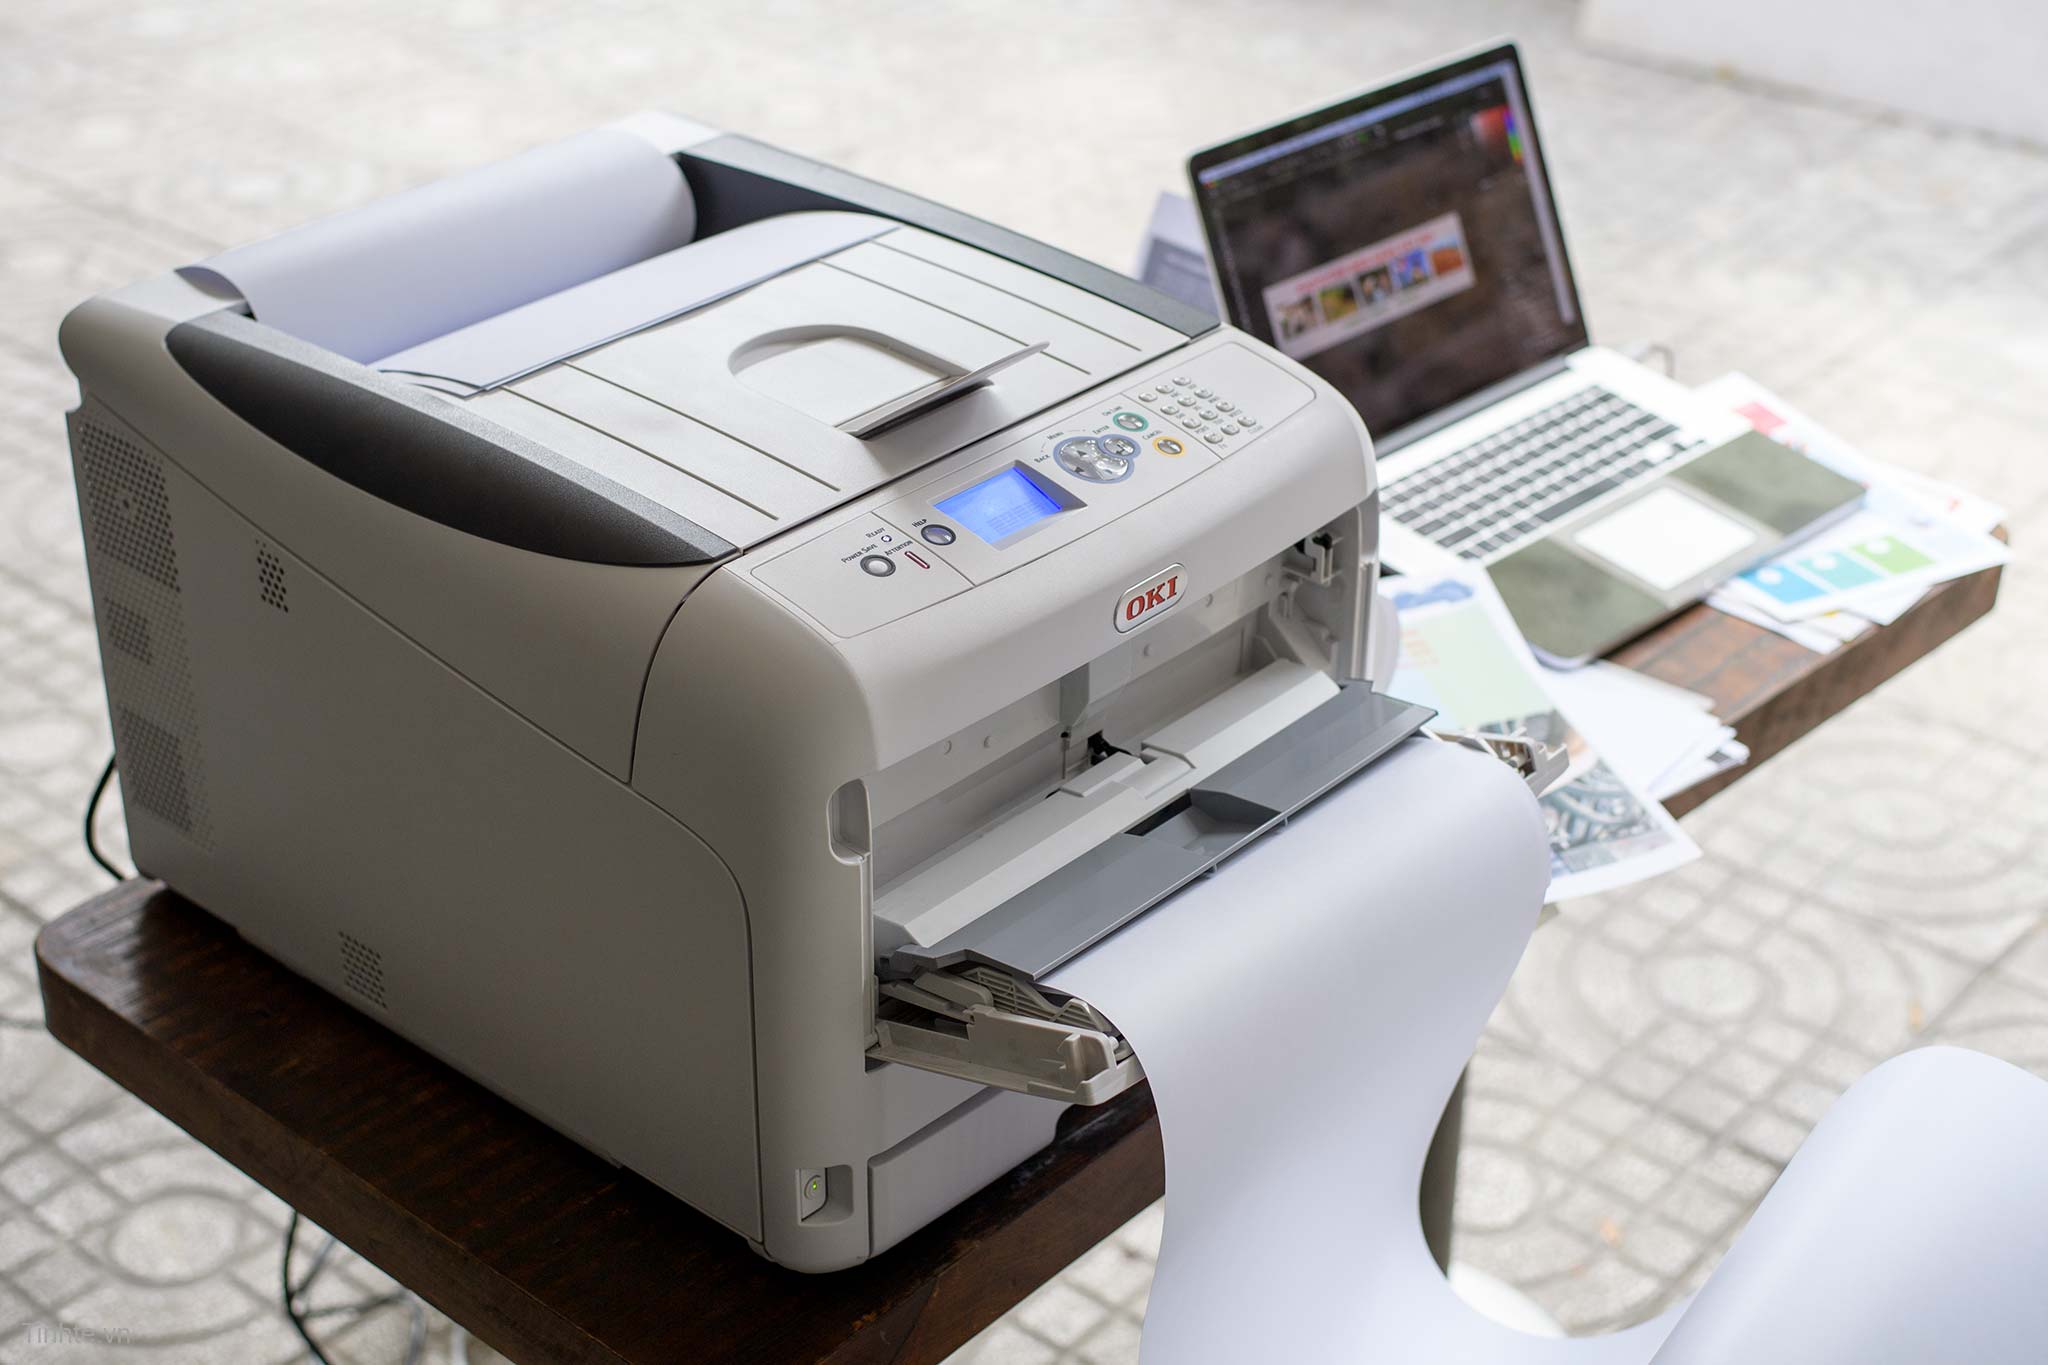 OKI C833n Review: An Affordable Enterprise Printer with Media